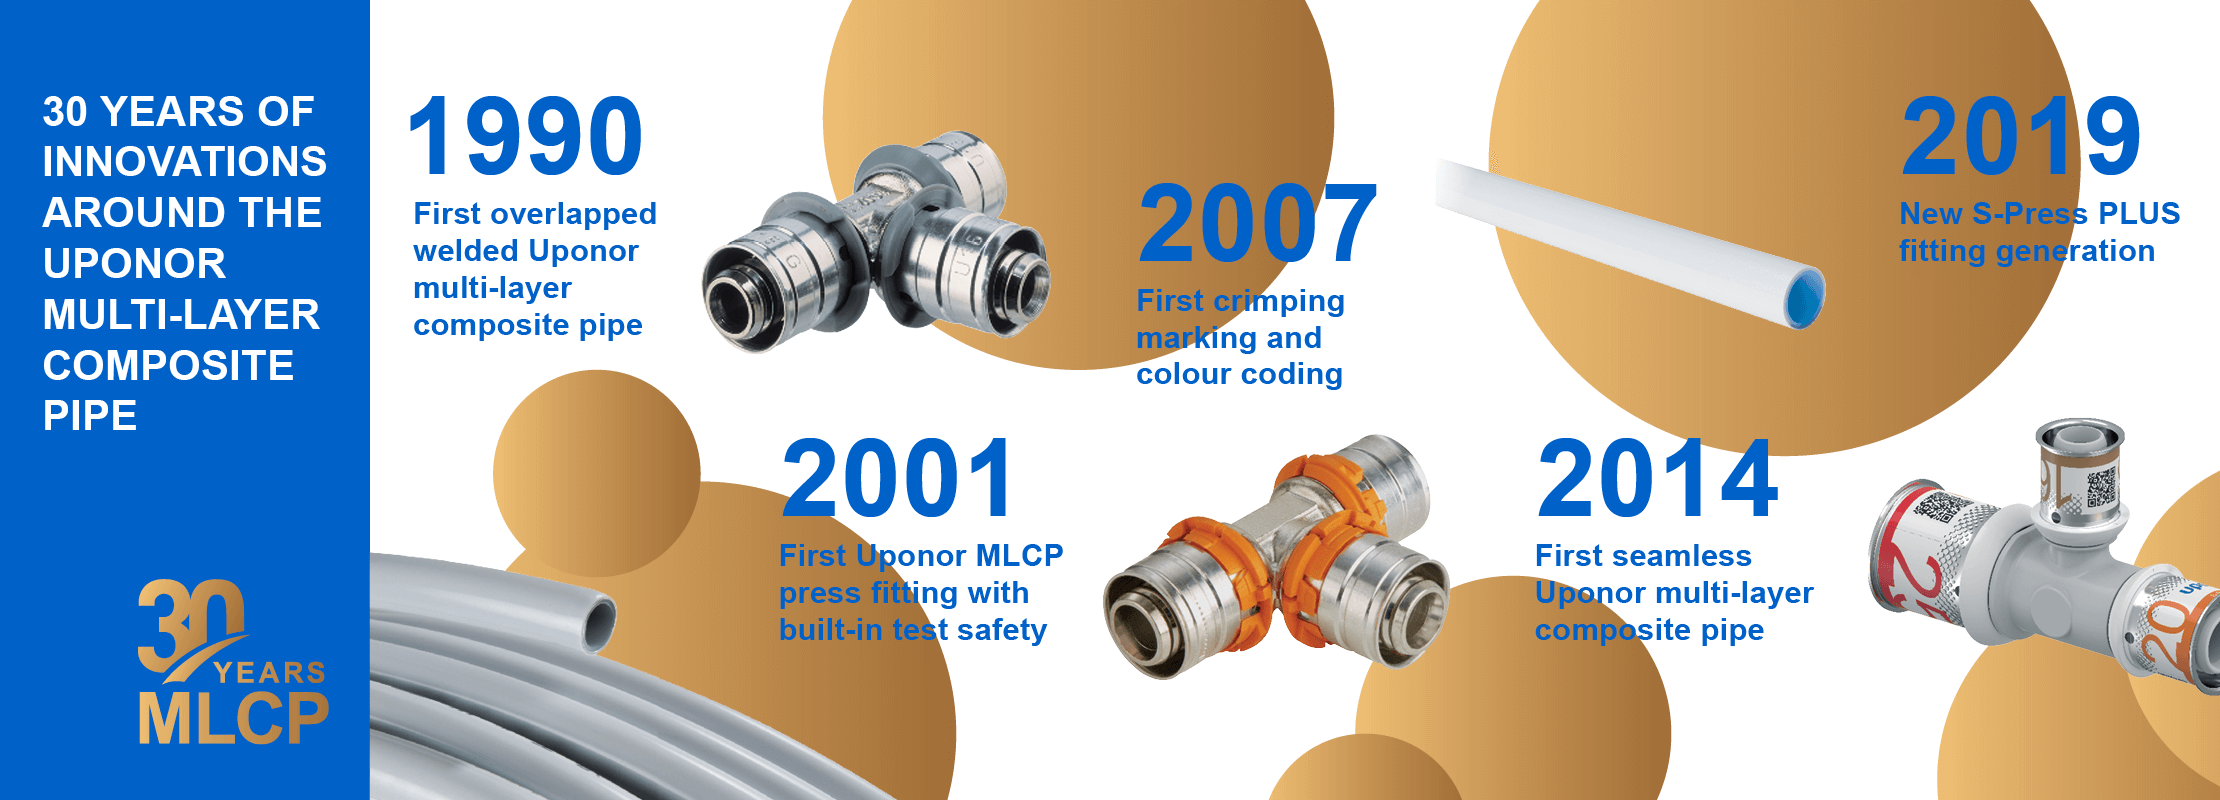 30 years of multi layer composite pipe mlcp